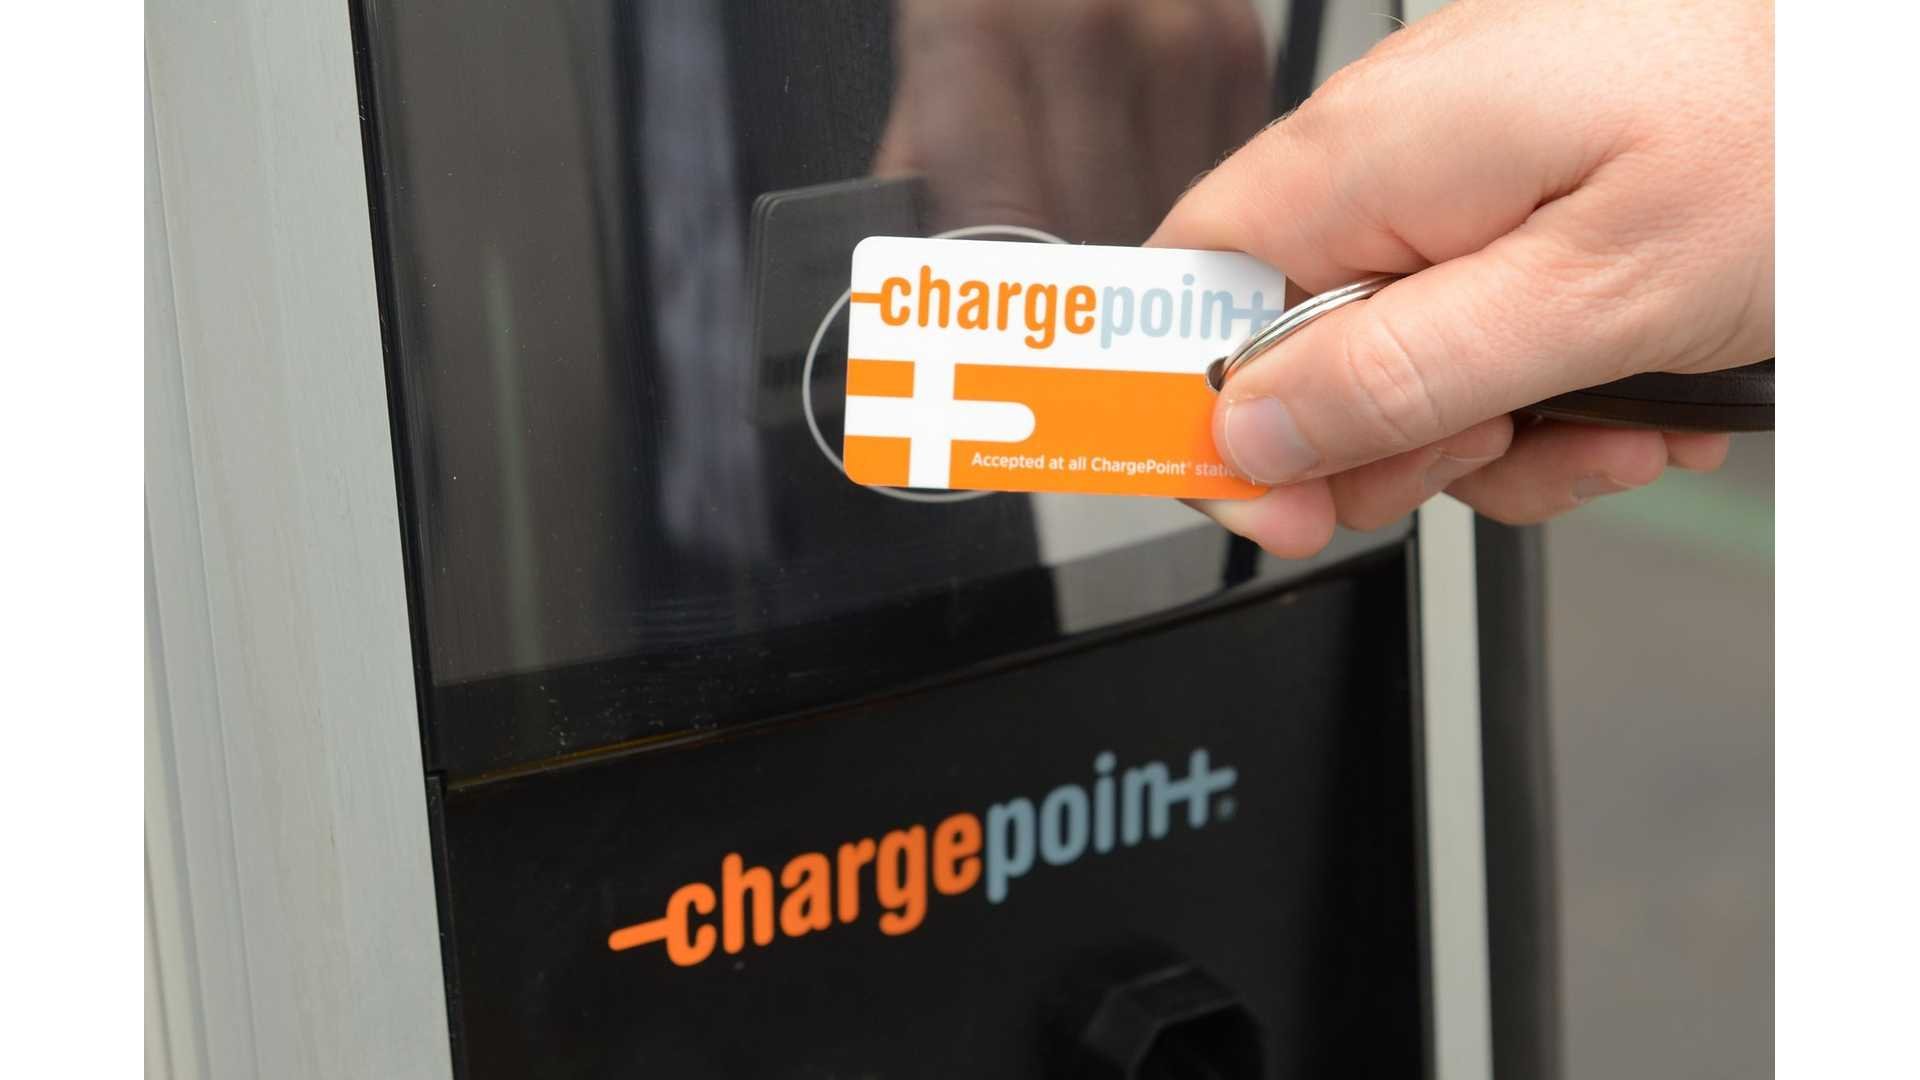 chargepoint-and-flo-initiate-roaming-agreement-in-north-america.jpg